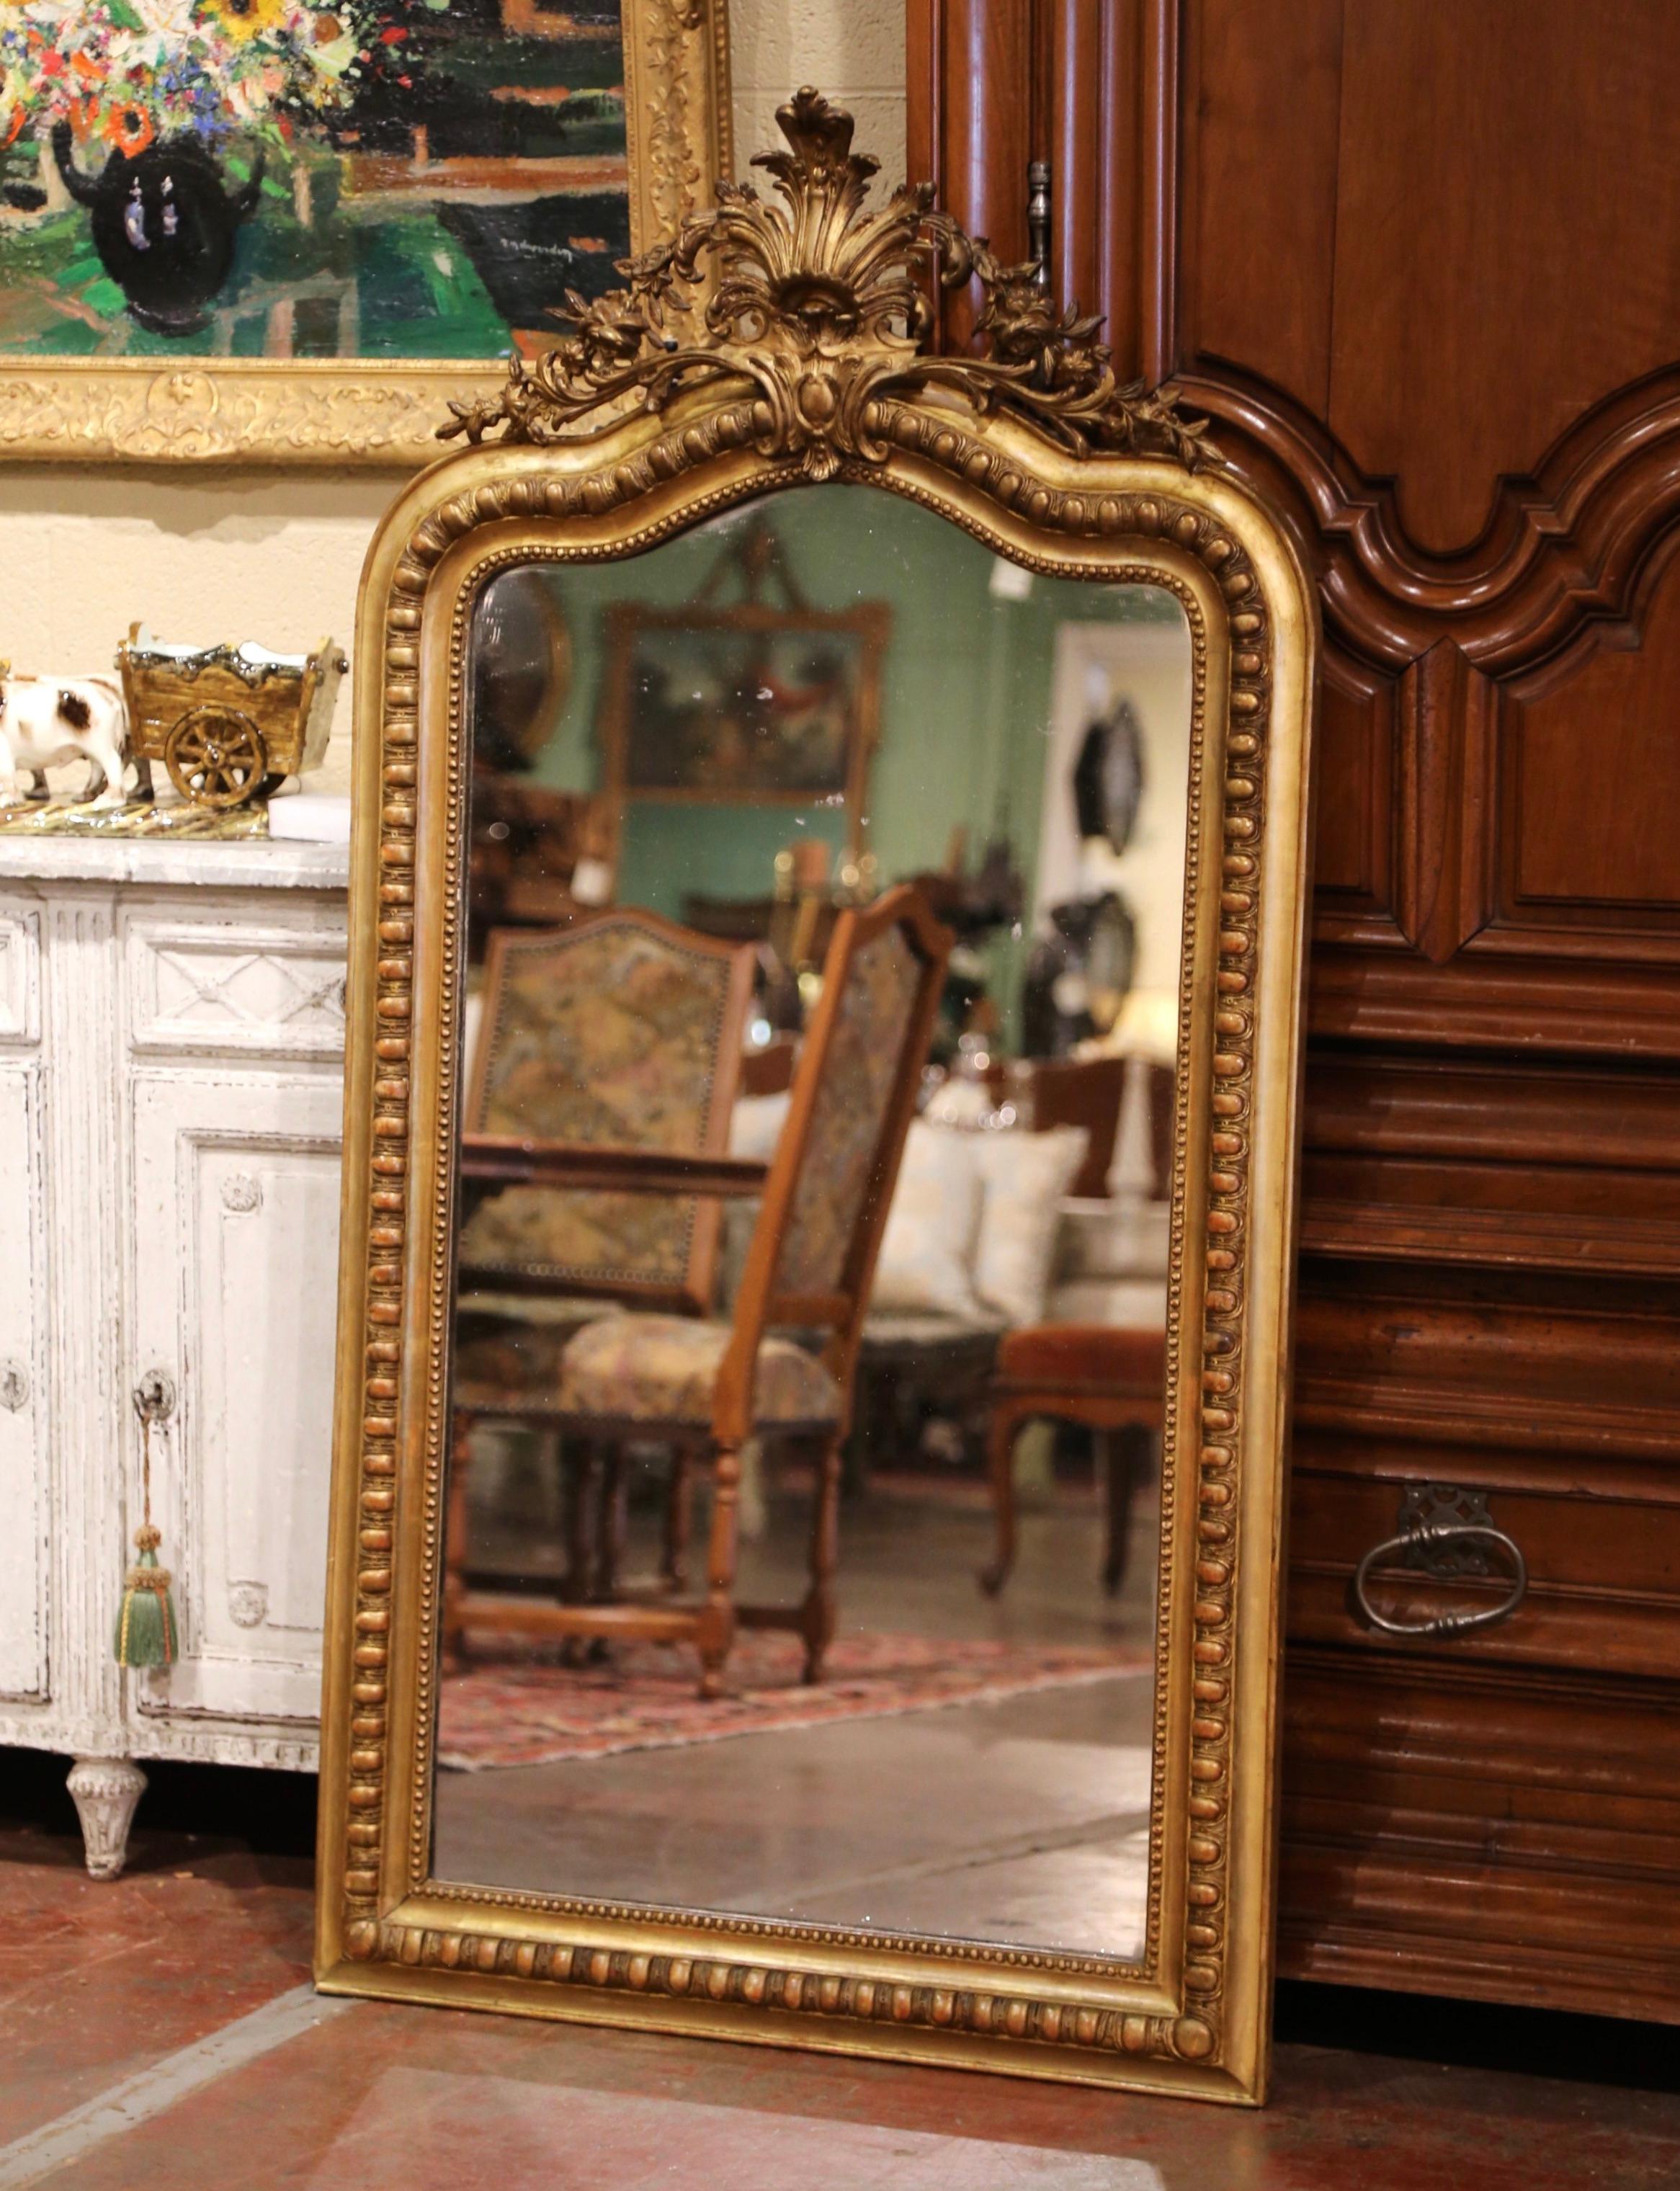 This elegant antique gilt mirror was crafted in France, circa 1870. Arched at the top, the ornate pierced pediment features a floral and shell decor cartouche with leaves trailing down the sides and the frame is decorated with geometric designs